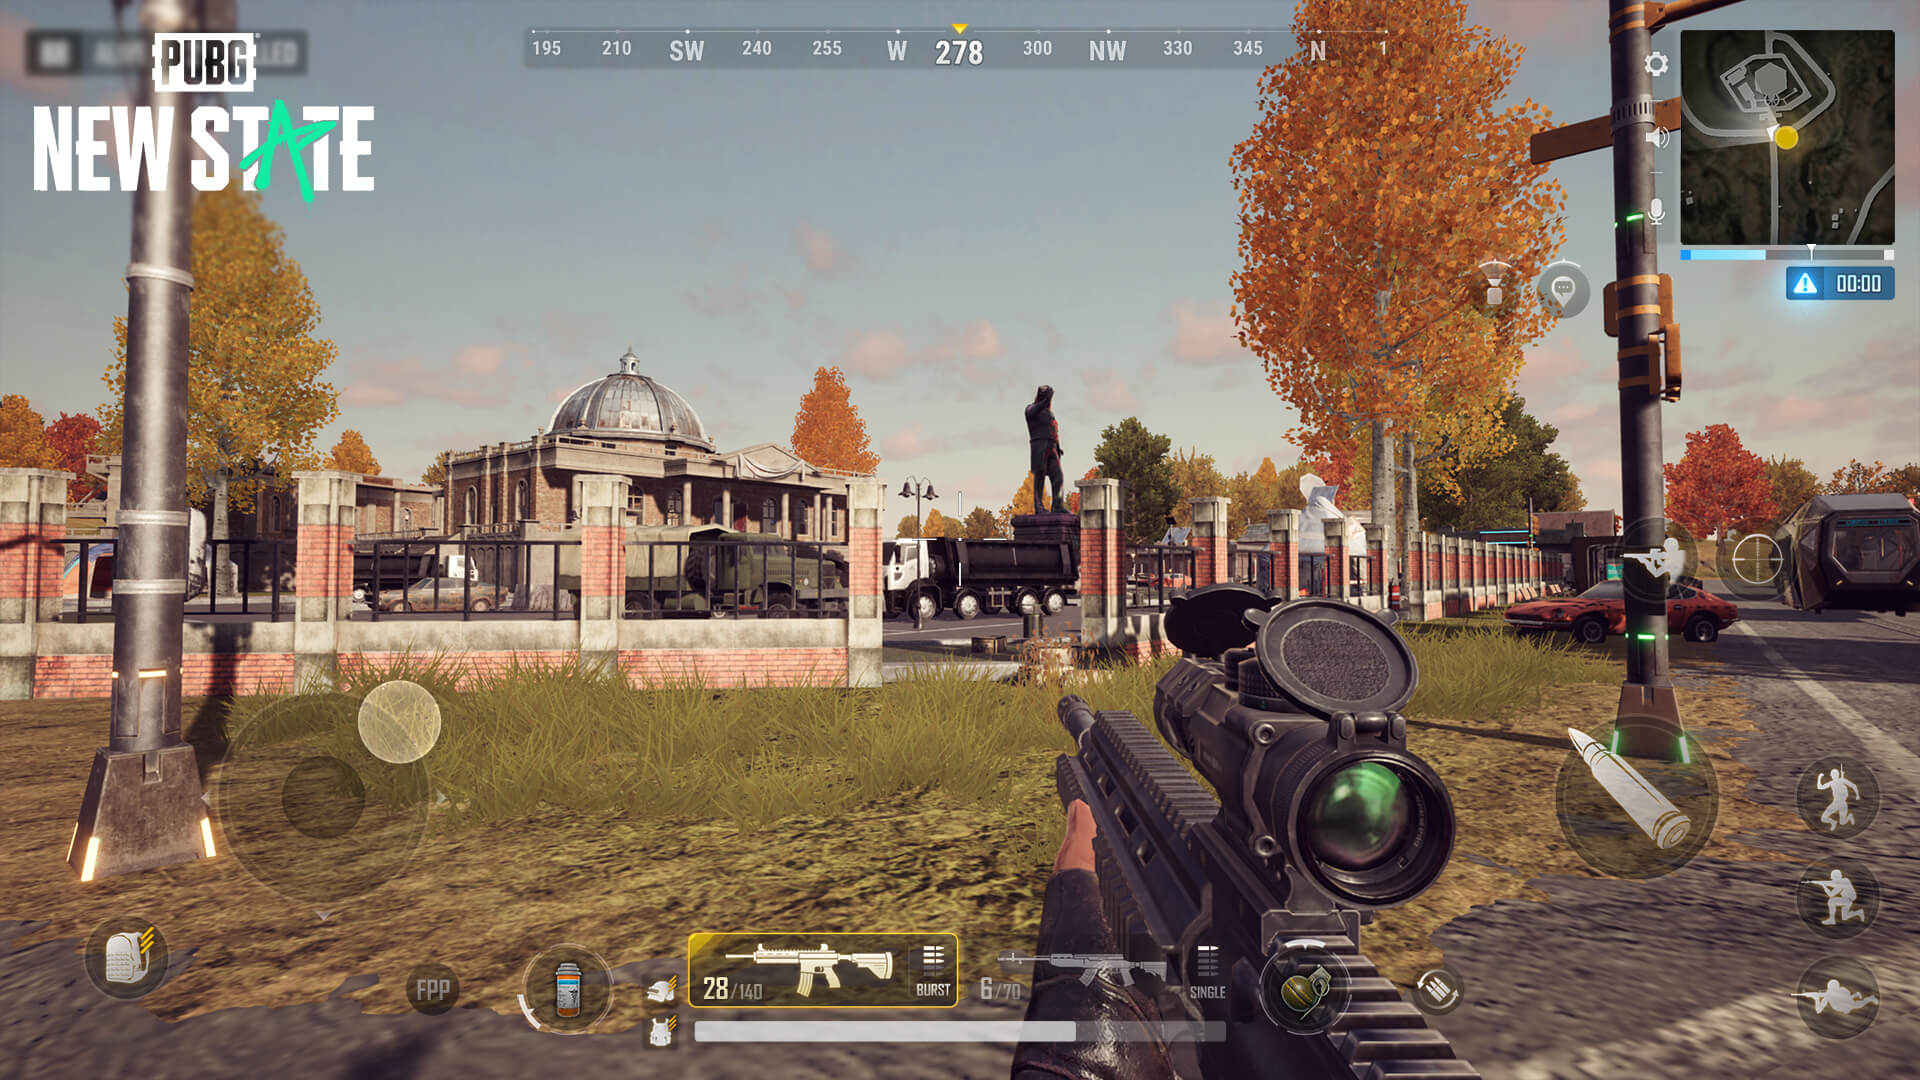 PUBG: New State is the futuristic sequel to PUBG Mobile, and it's coming this ye